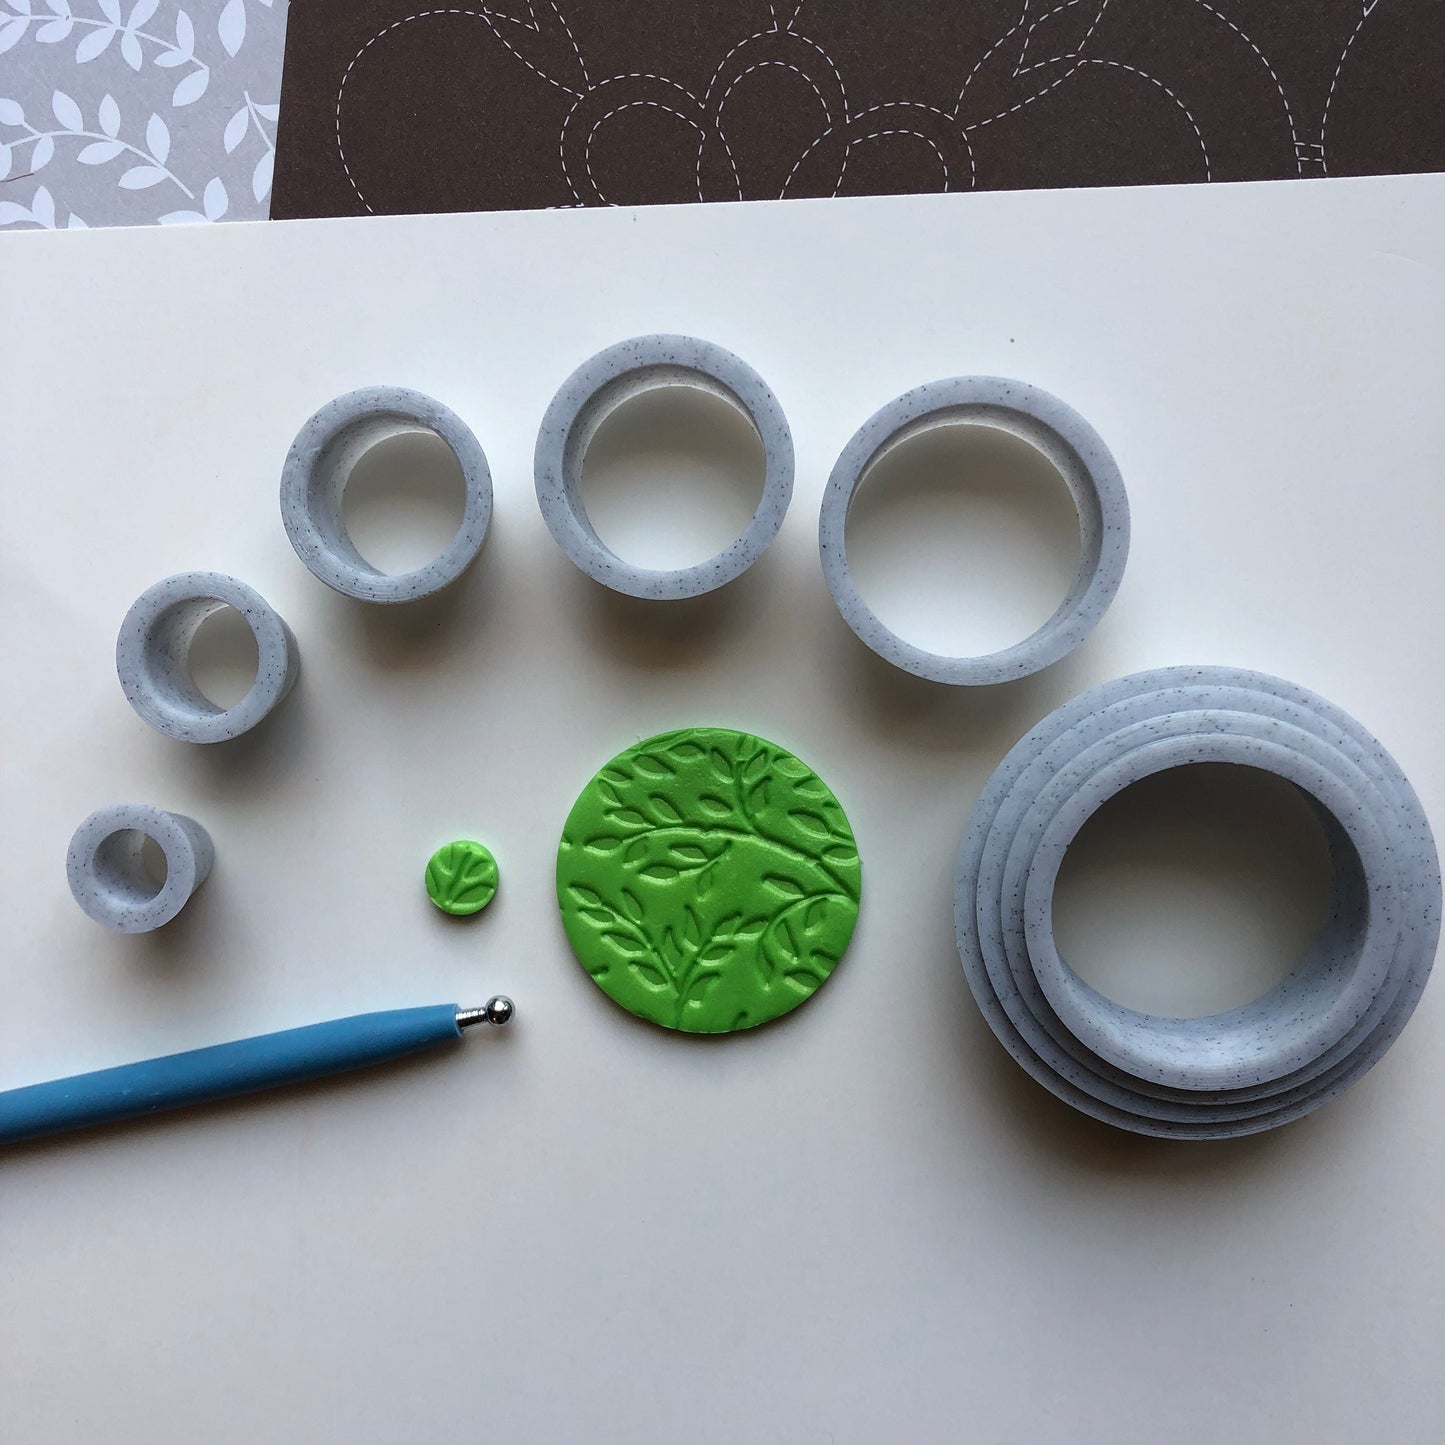 Circle cutters set - made for use with polymer clay